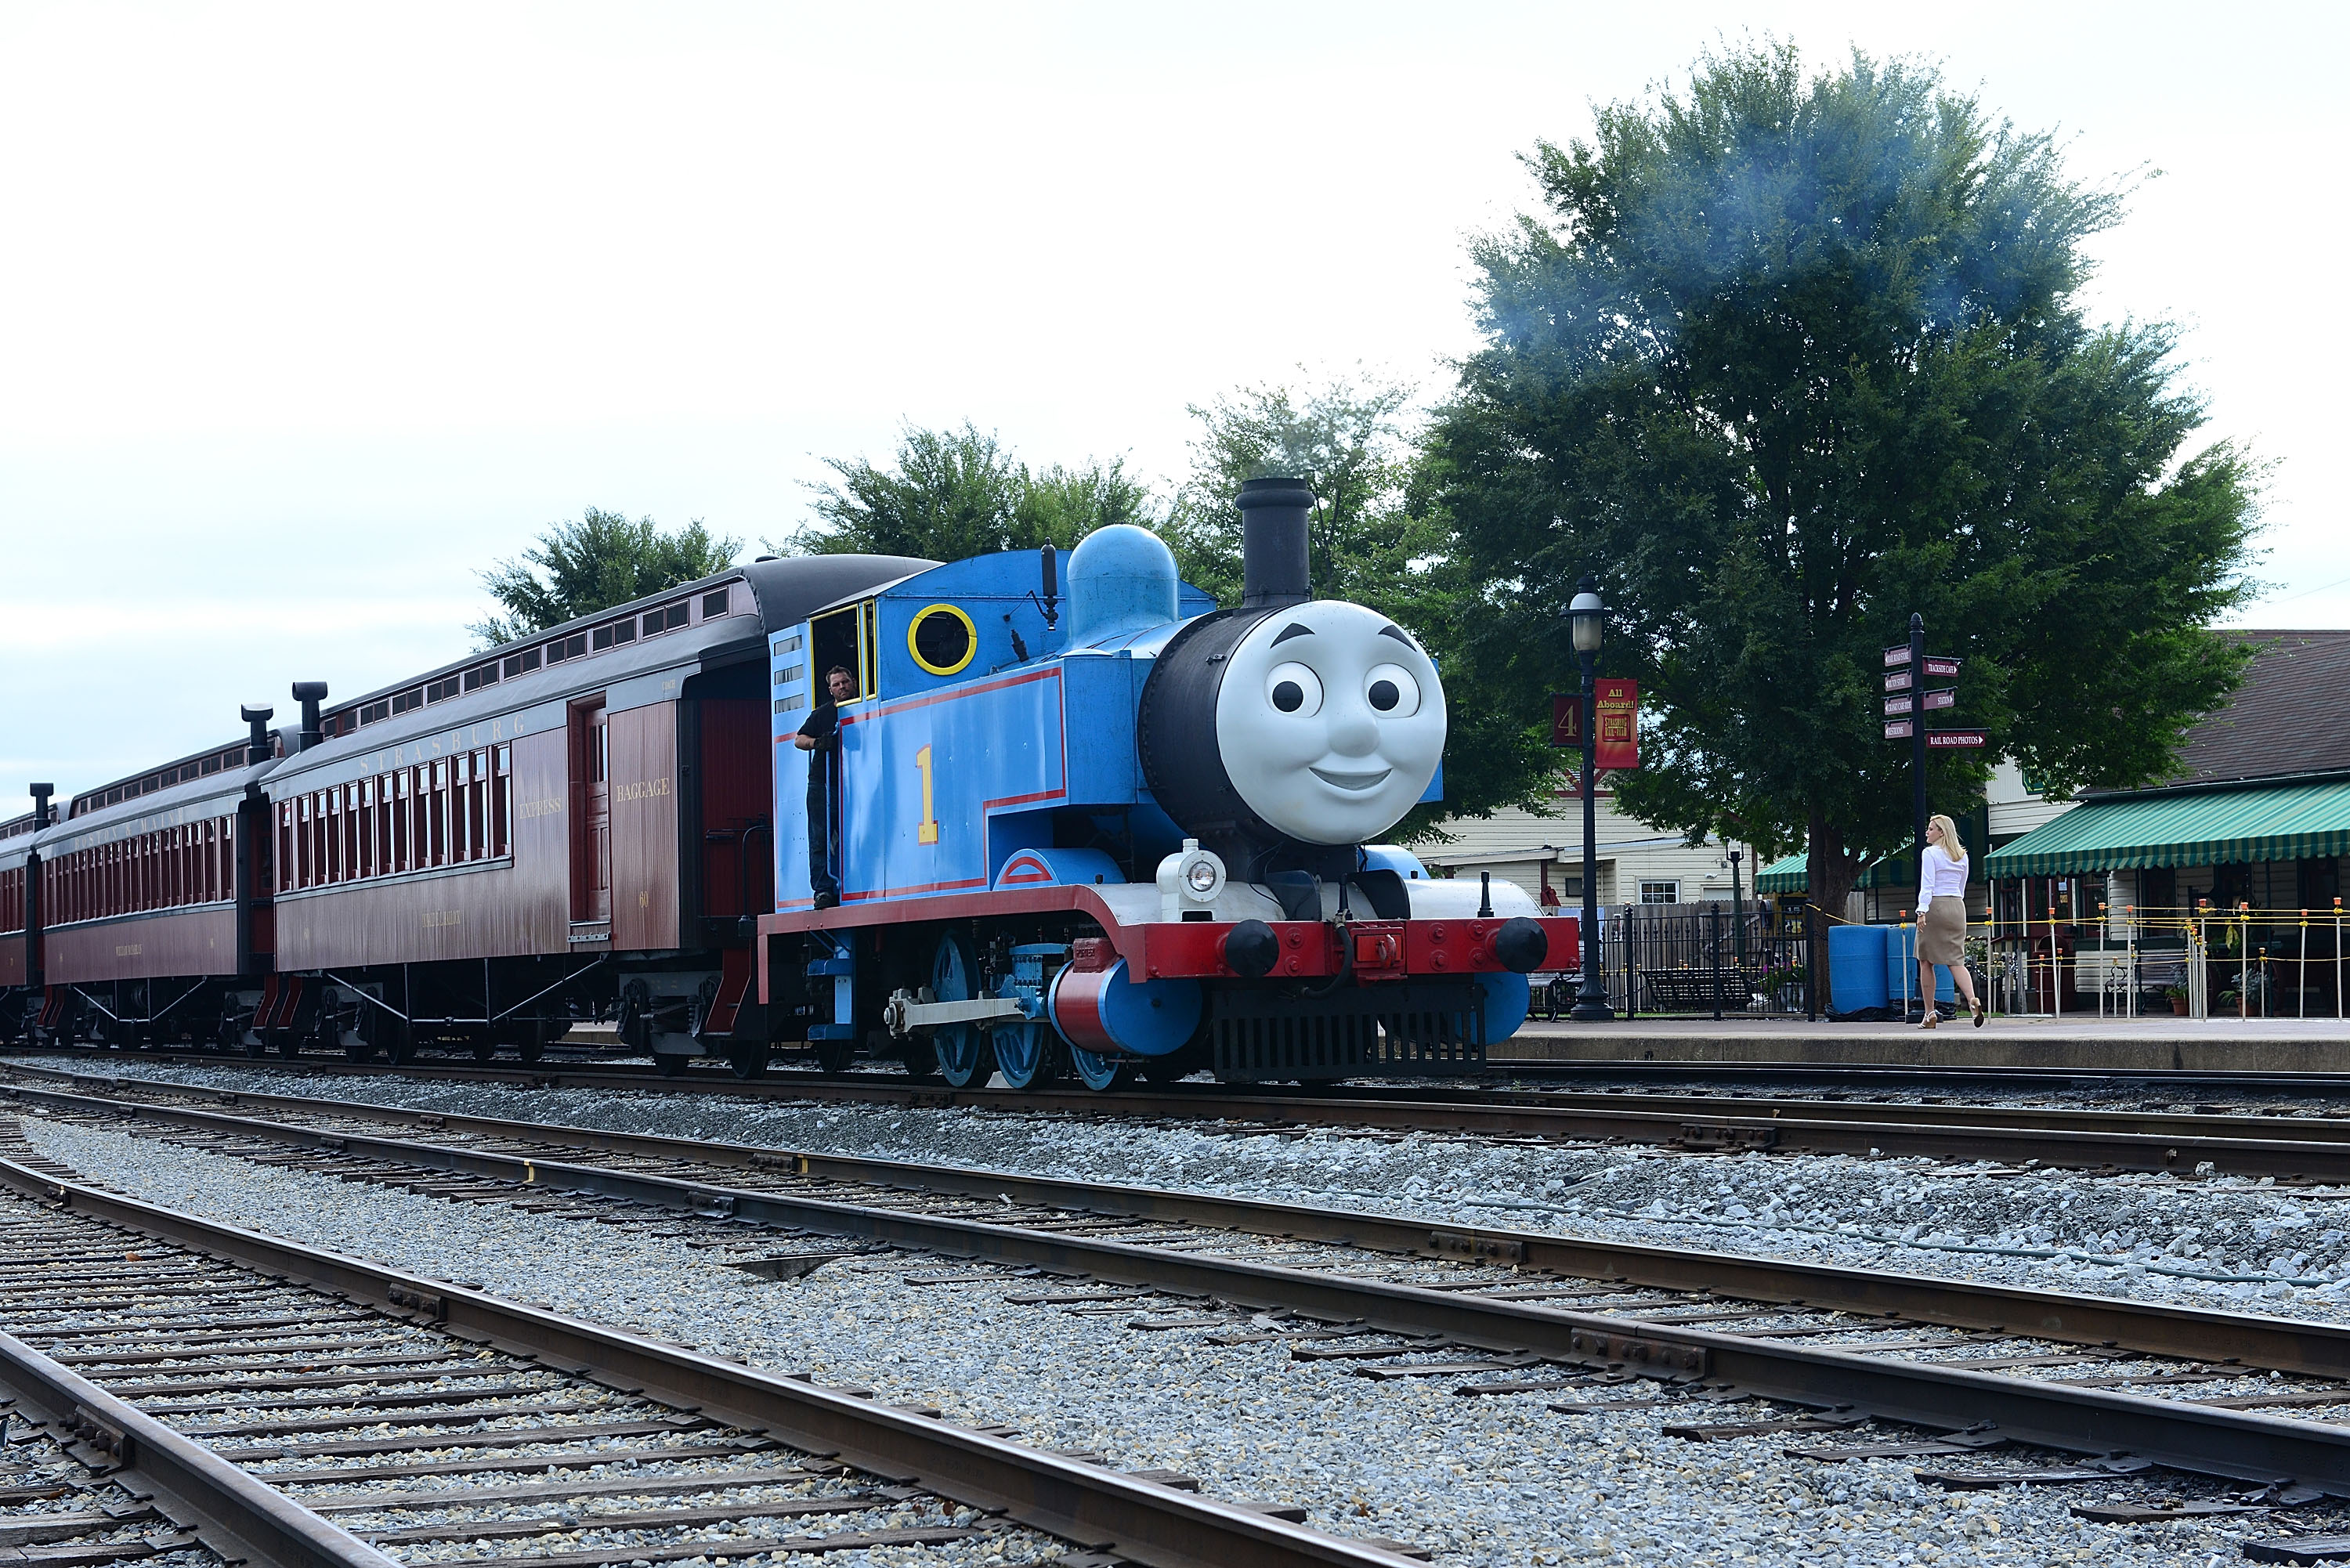 Day Out With Thomas: The Thrill Of The Ride Tour 2014 Goes Green As Thomas The Tank Engine's Best Friend Percy Makes North American Debut